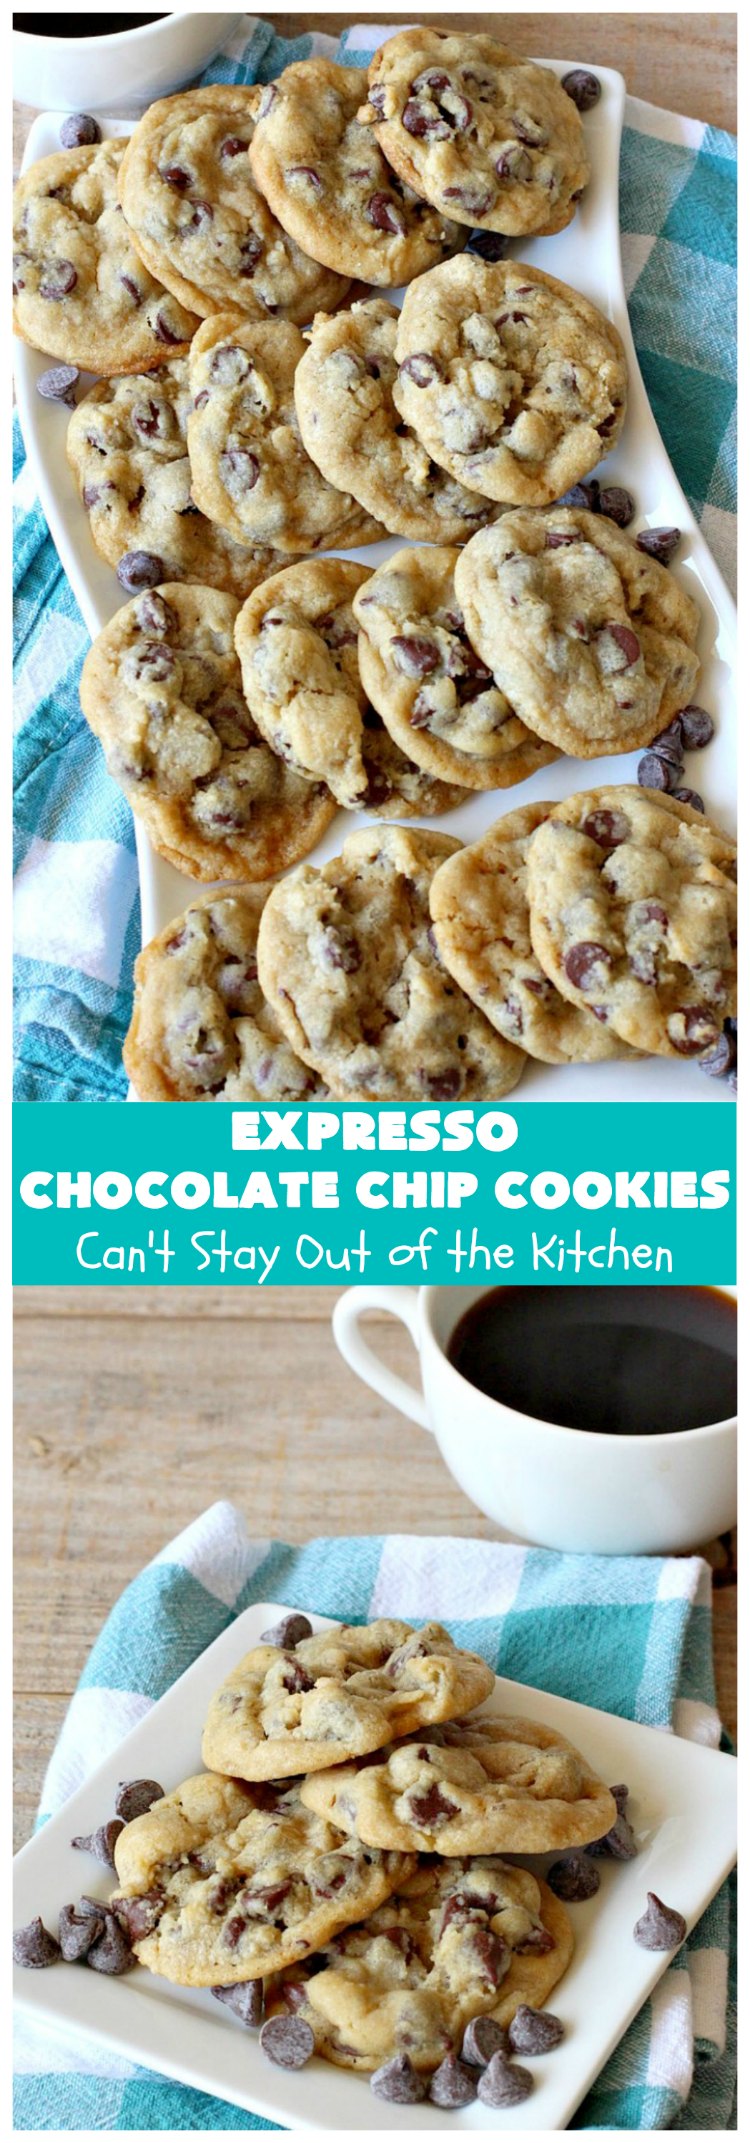 Expresso Chocolate Chip Cookies | Can't Stay Out of the Kitchen